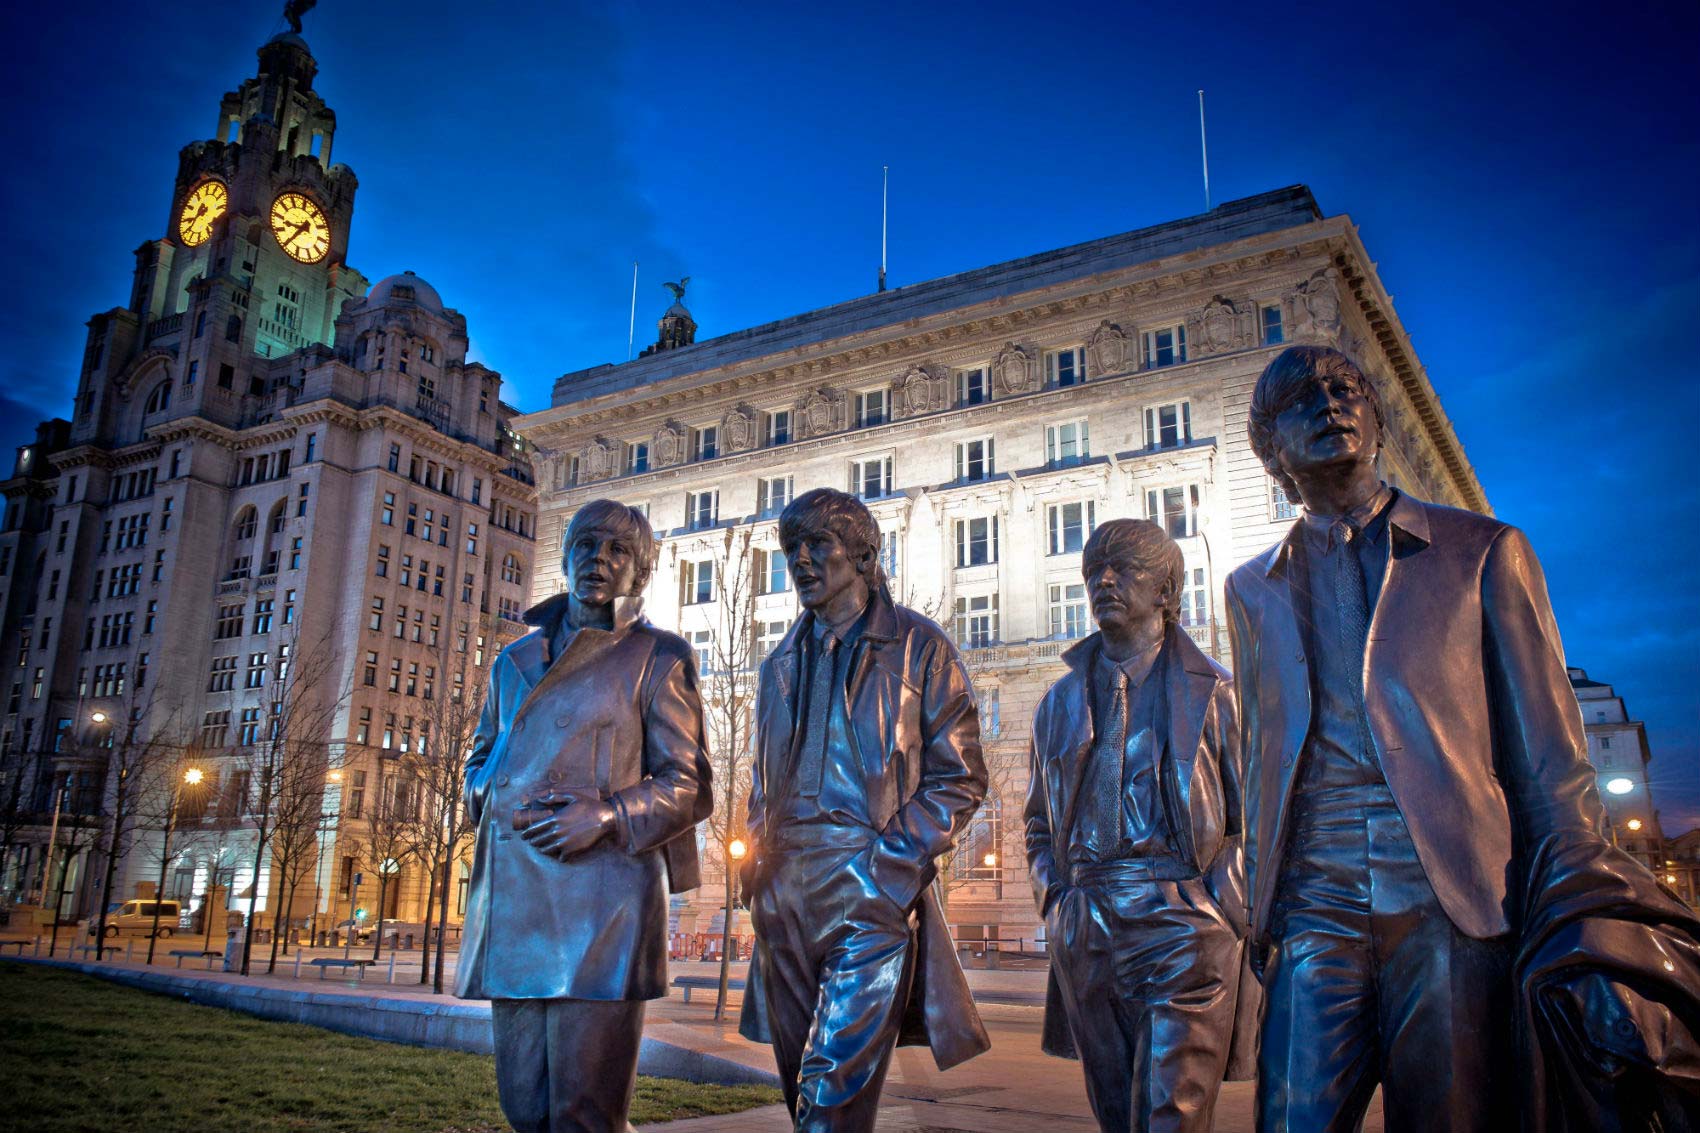 Pier Head and Beatles statues